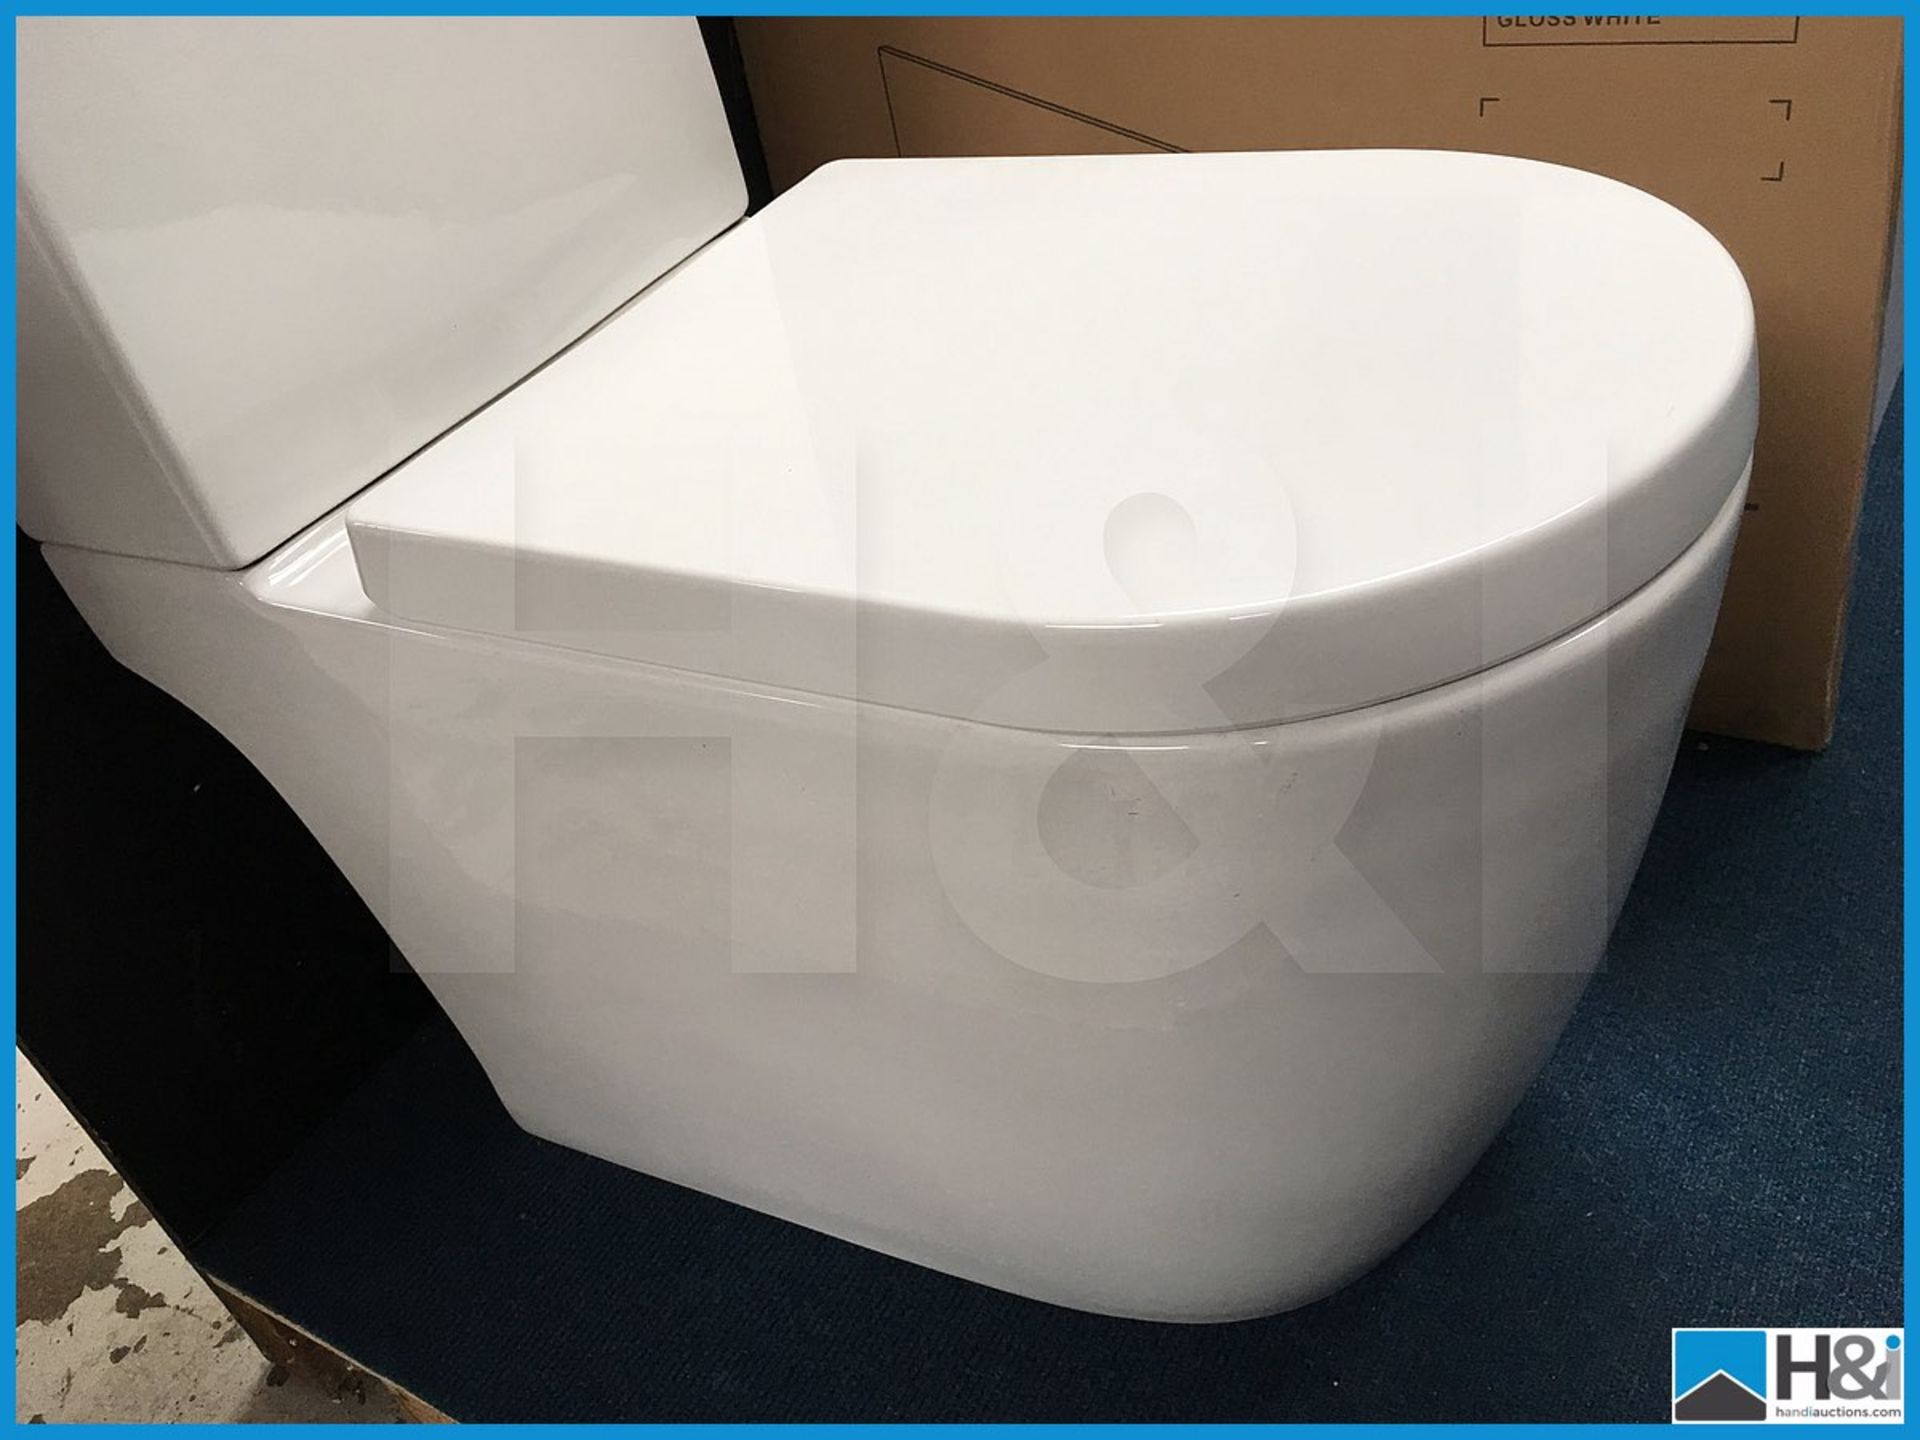 Stunning designer close couple Adam contemporary wc with soft close seat. New and boxed. Suggested - Image 2 of 4